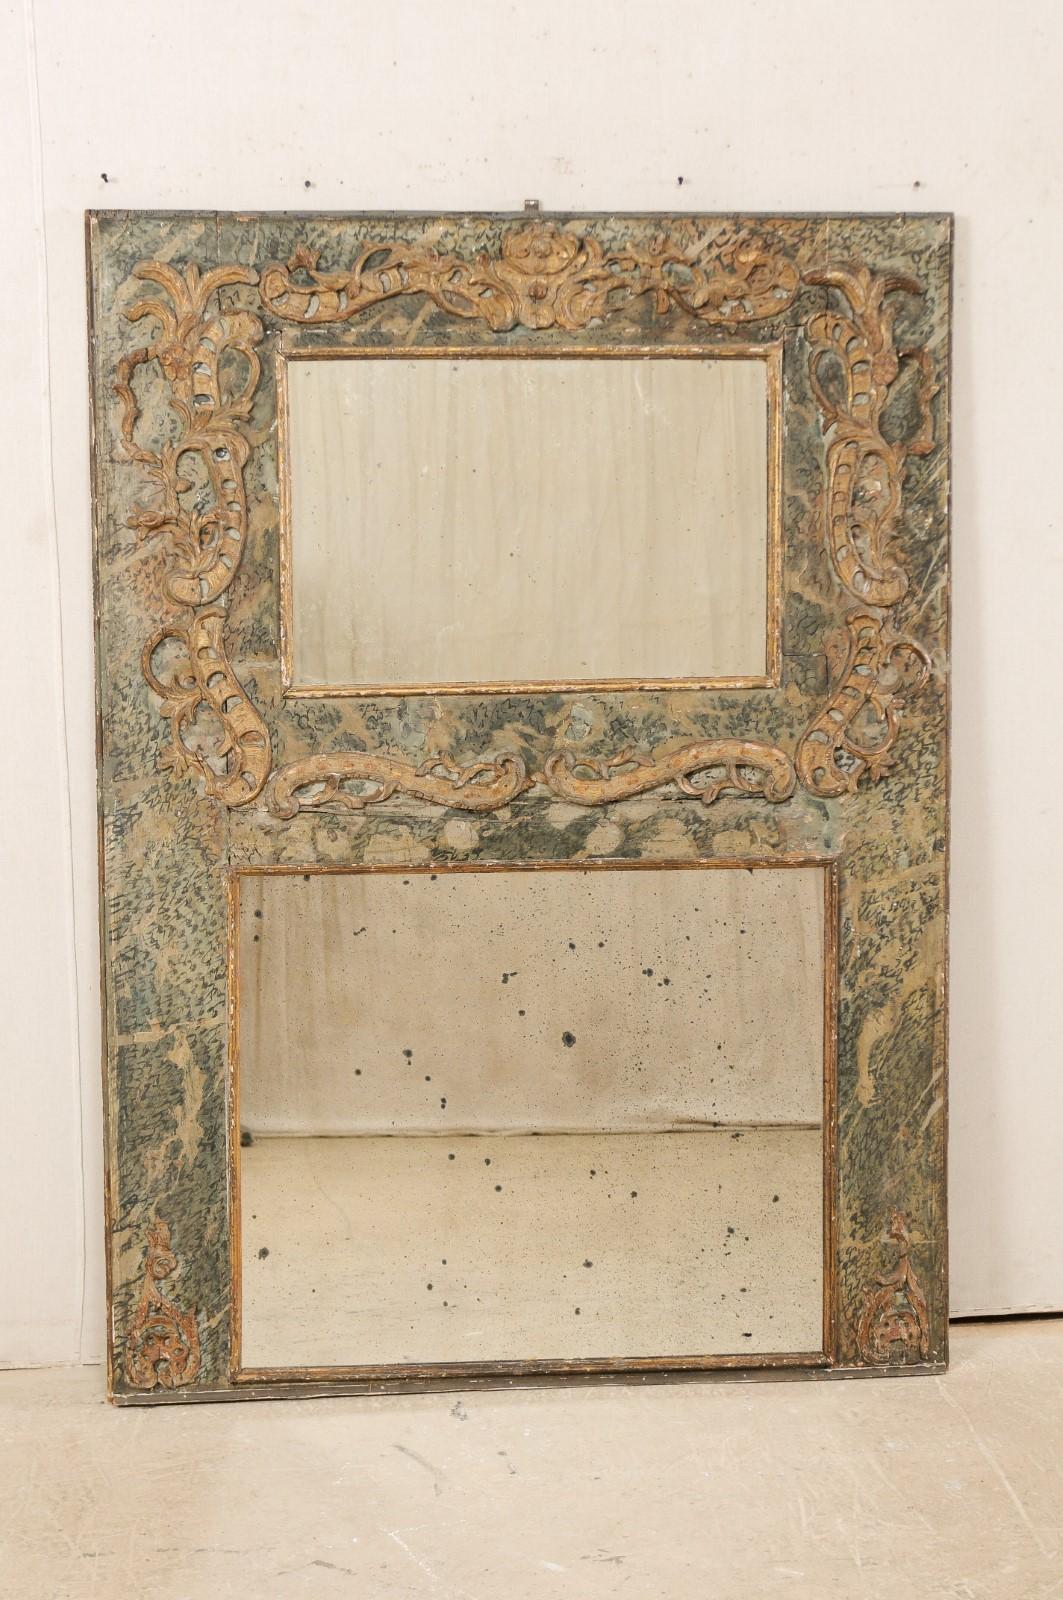 An Italian period Baroque mirror from the turn of the 17th and 18th century. This antique trumeau style mirror from Italy features a rectangular-shaped frame, which retains it's original or early paint, and two mirrors (top mirror slightly smaller